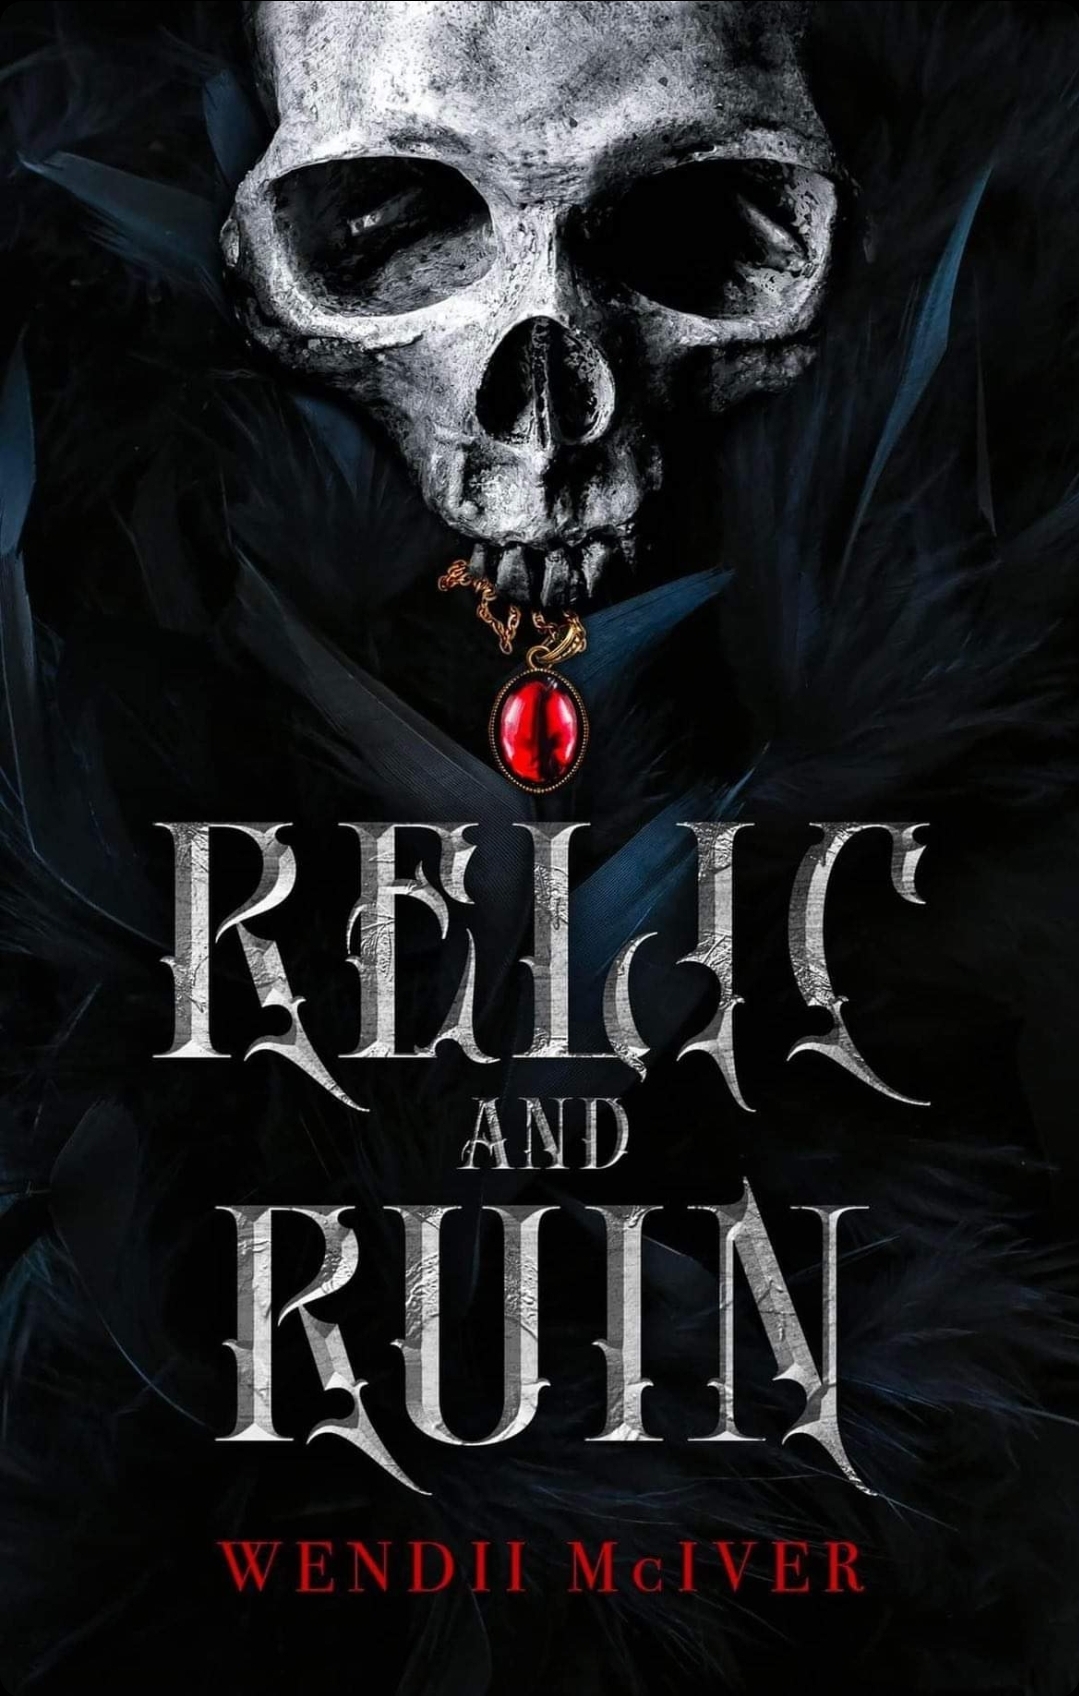 Cover for Wendii McIver's 'Relic and Ruin'